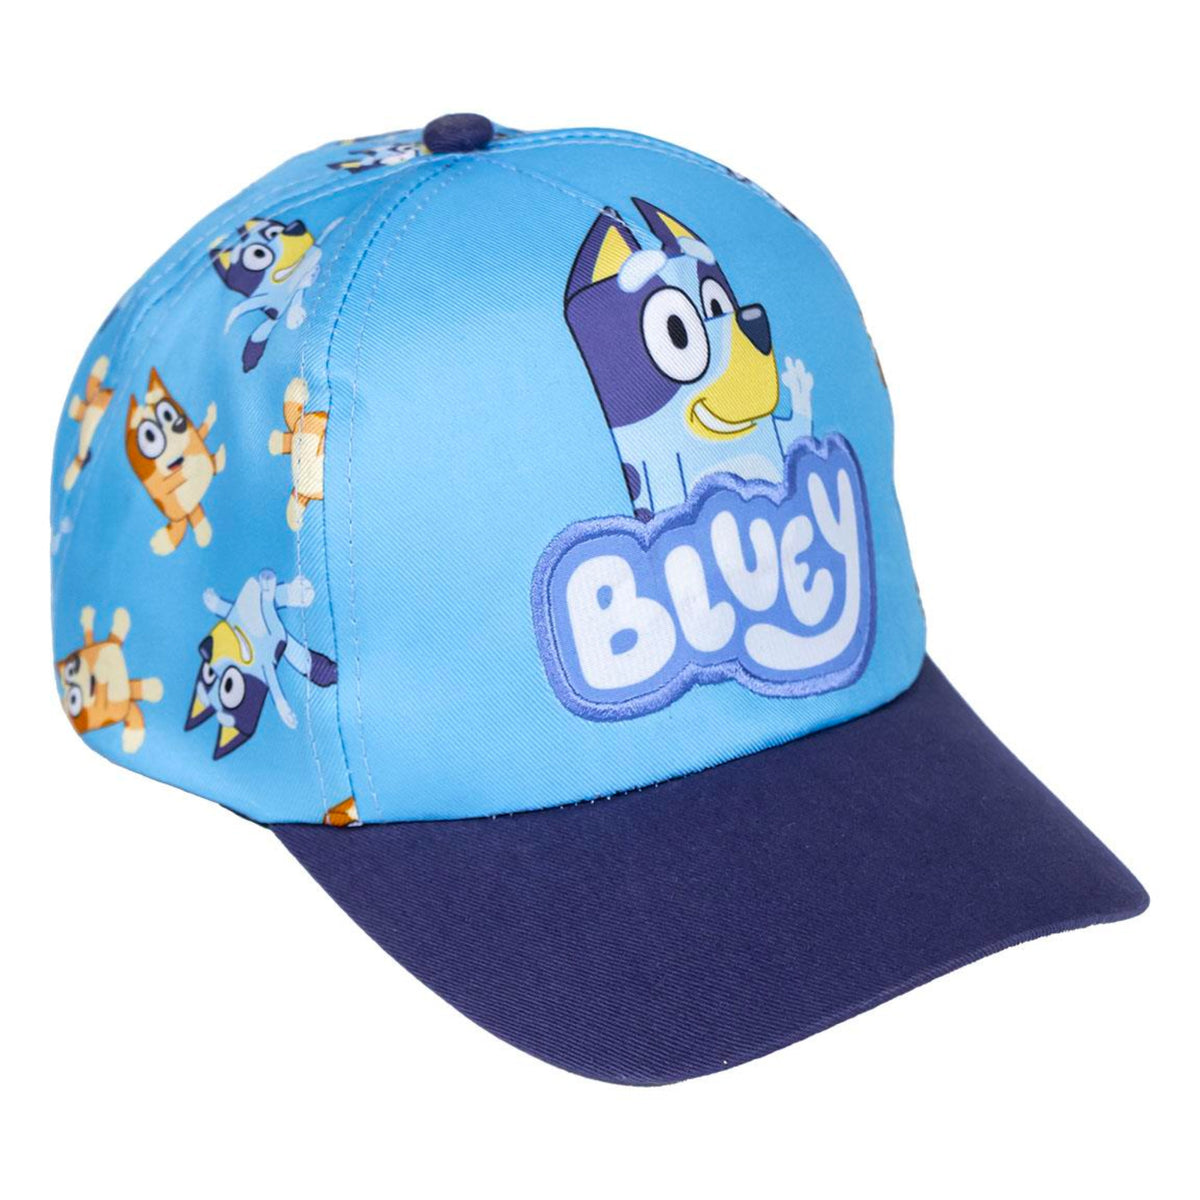 Bluey Curved Youth Hat